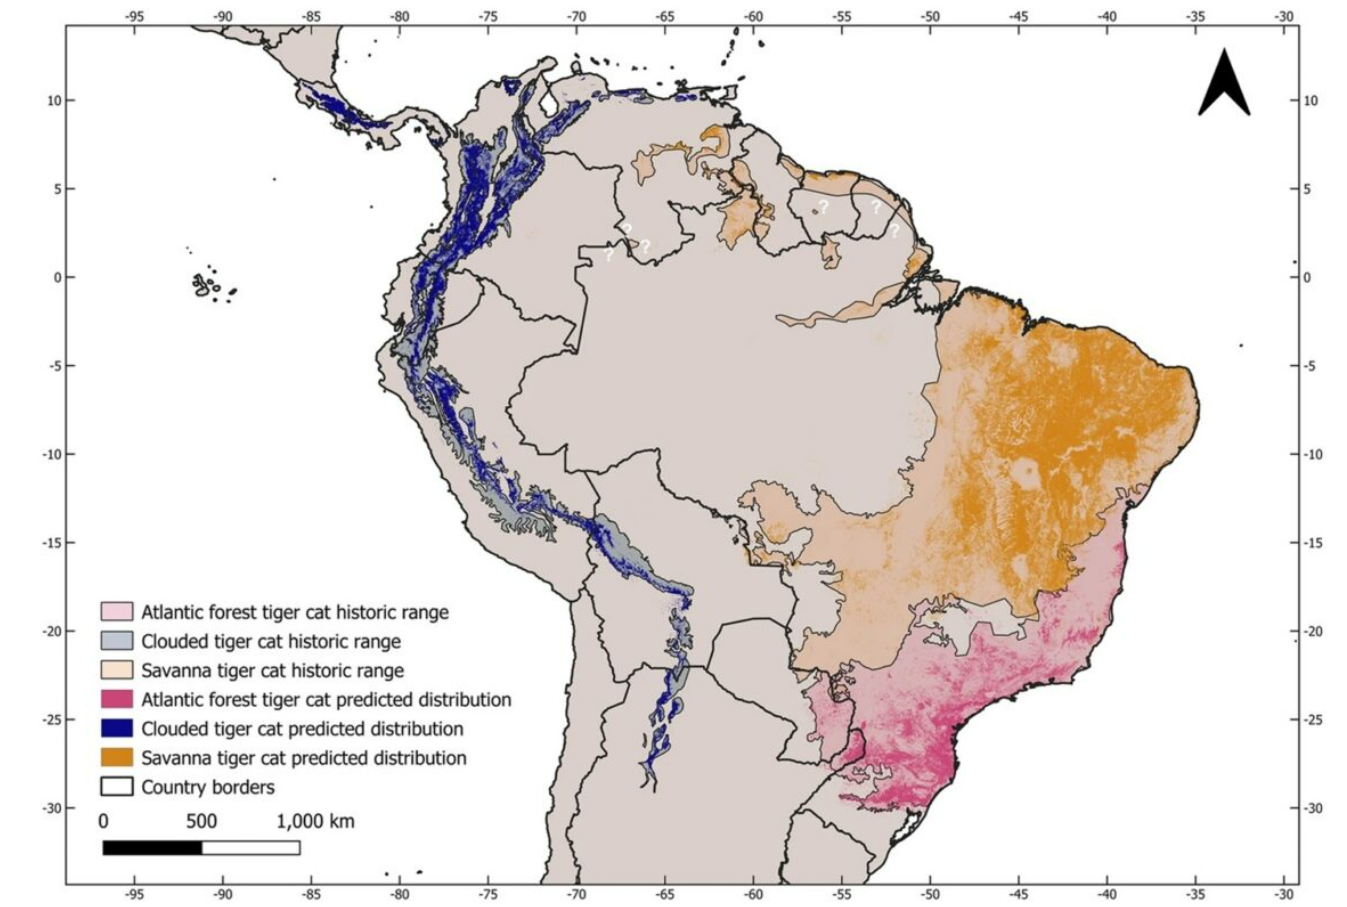 A map of South America showing the historical and predicted current distribution of the three tiger cat species.